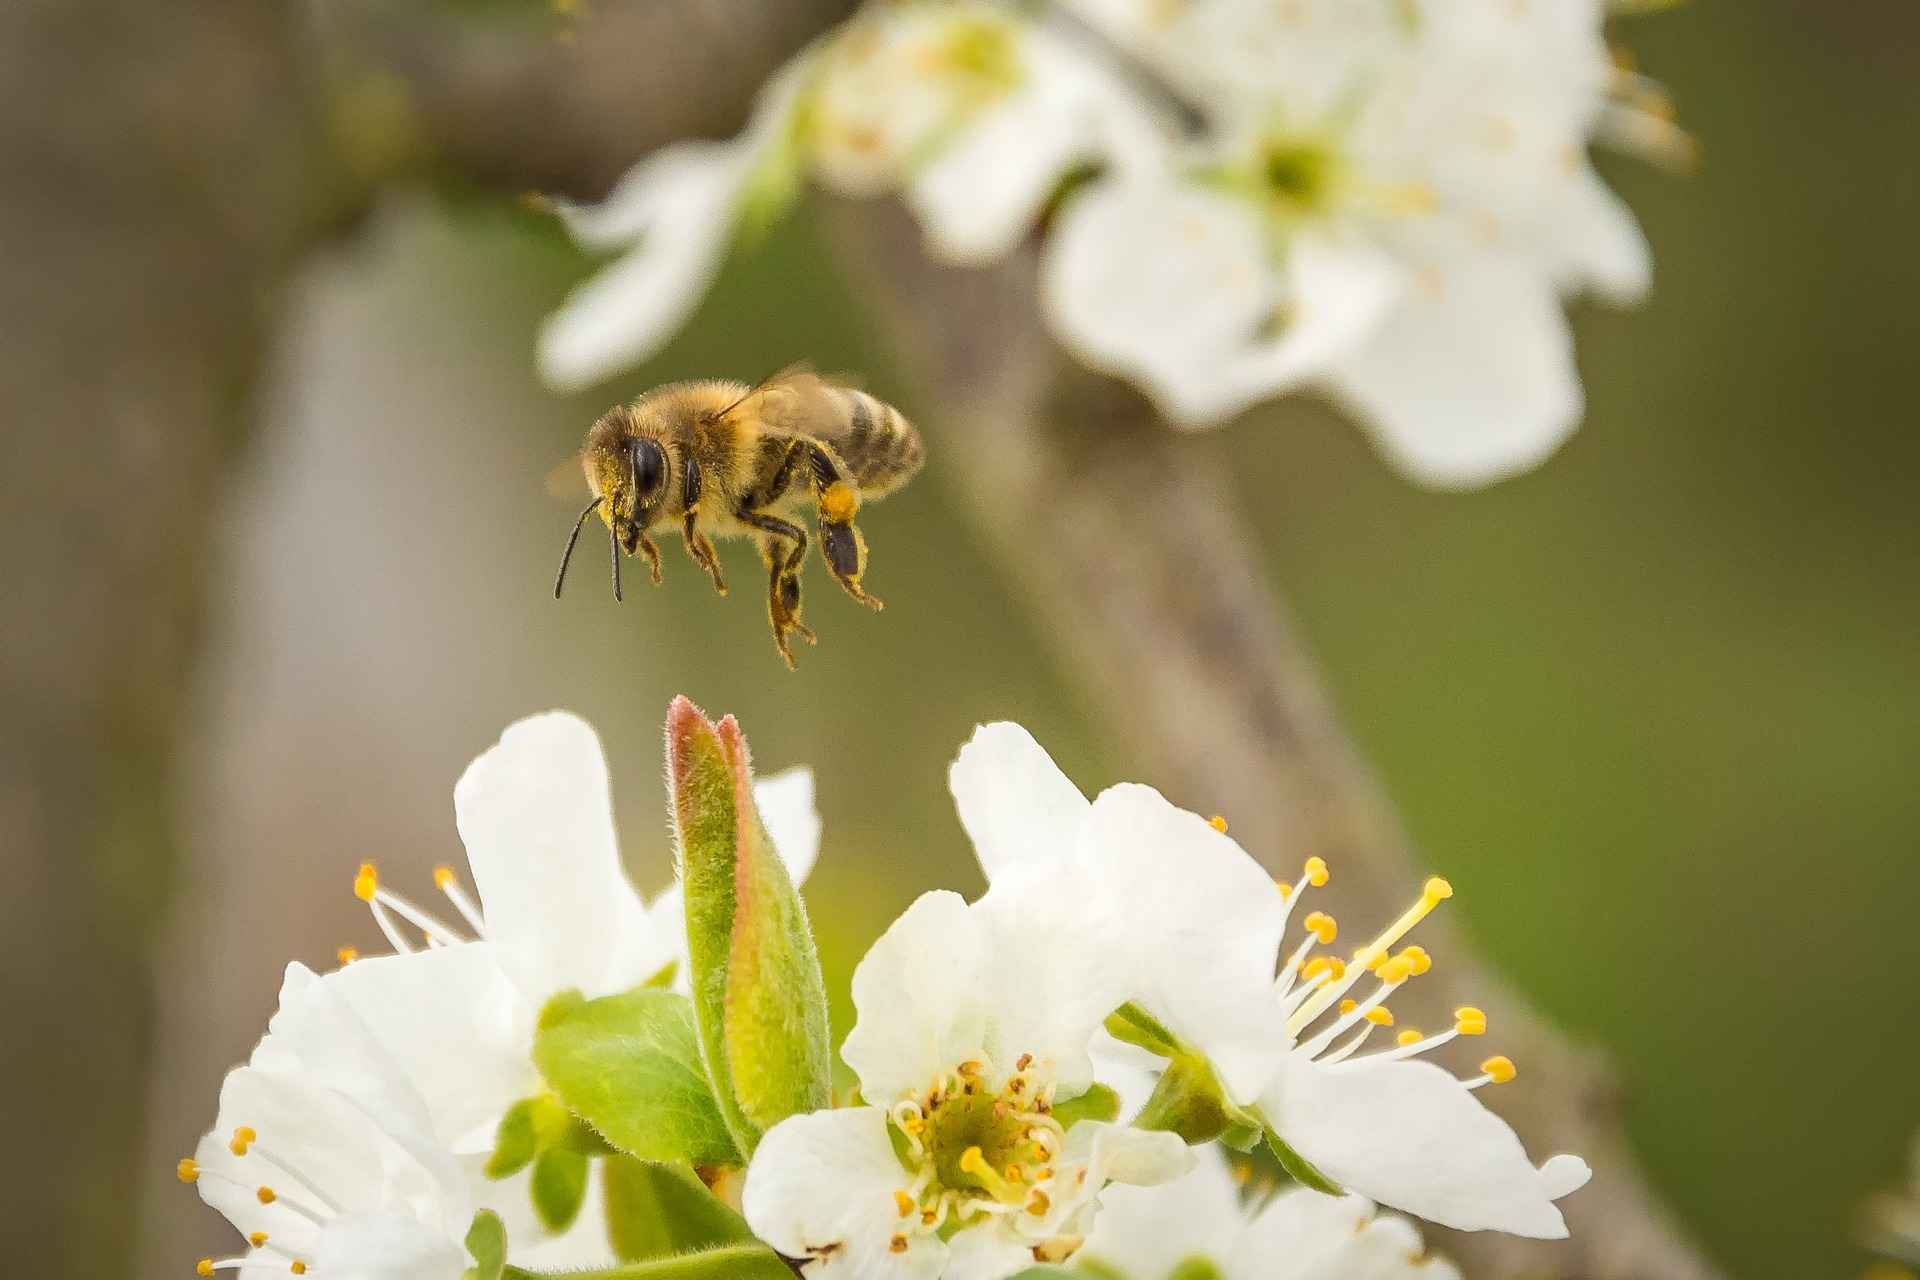 Pollination Of Fruit Trees: Principles Of Pollinating Fruit Trees